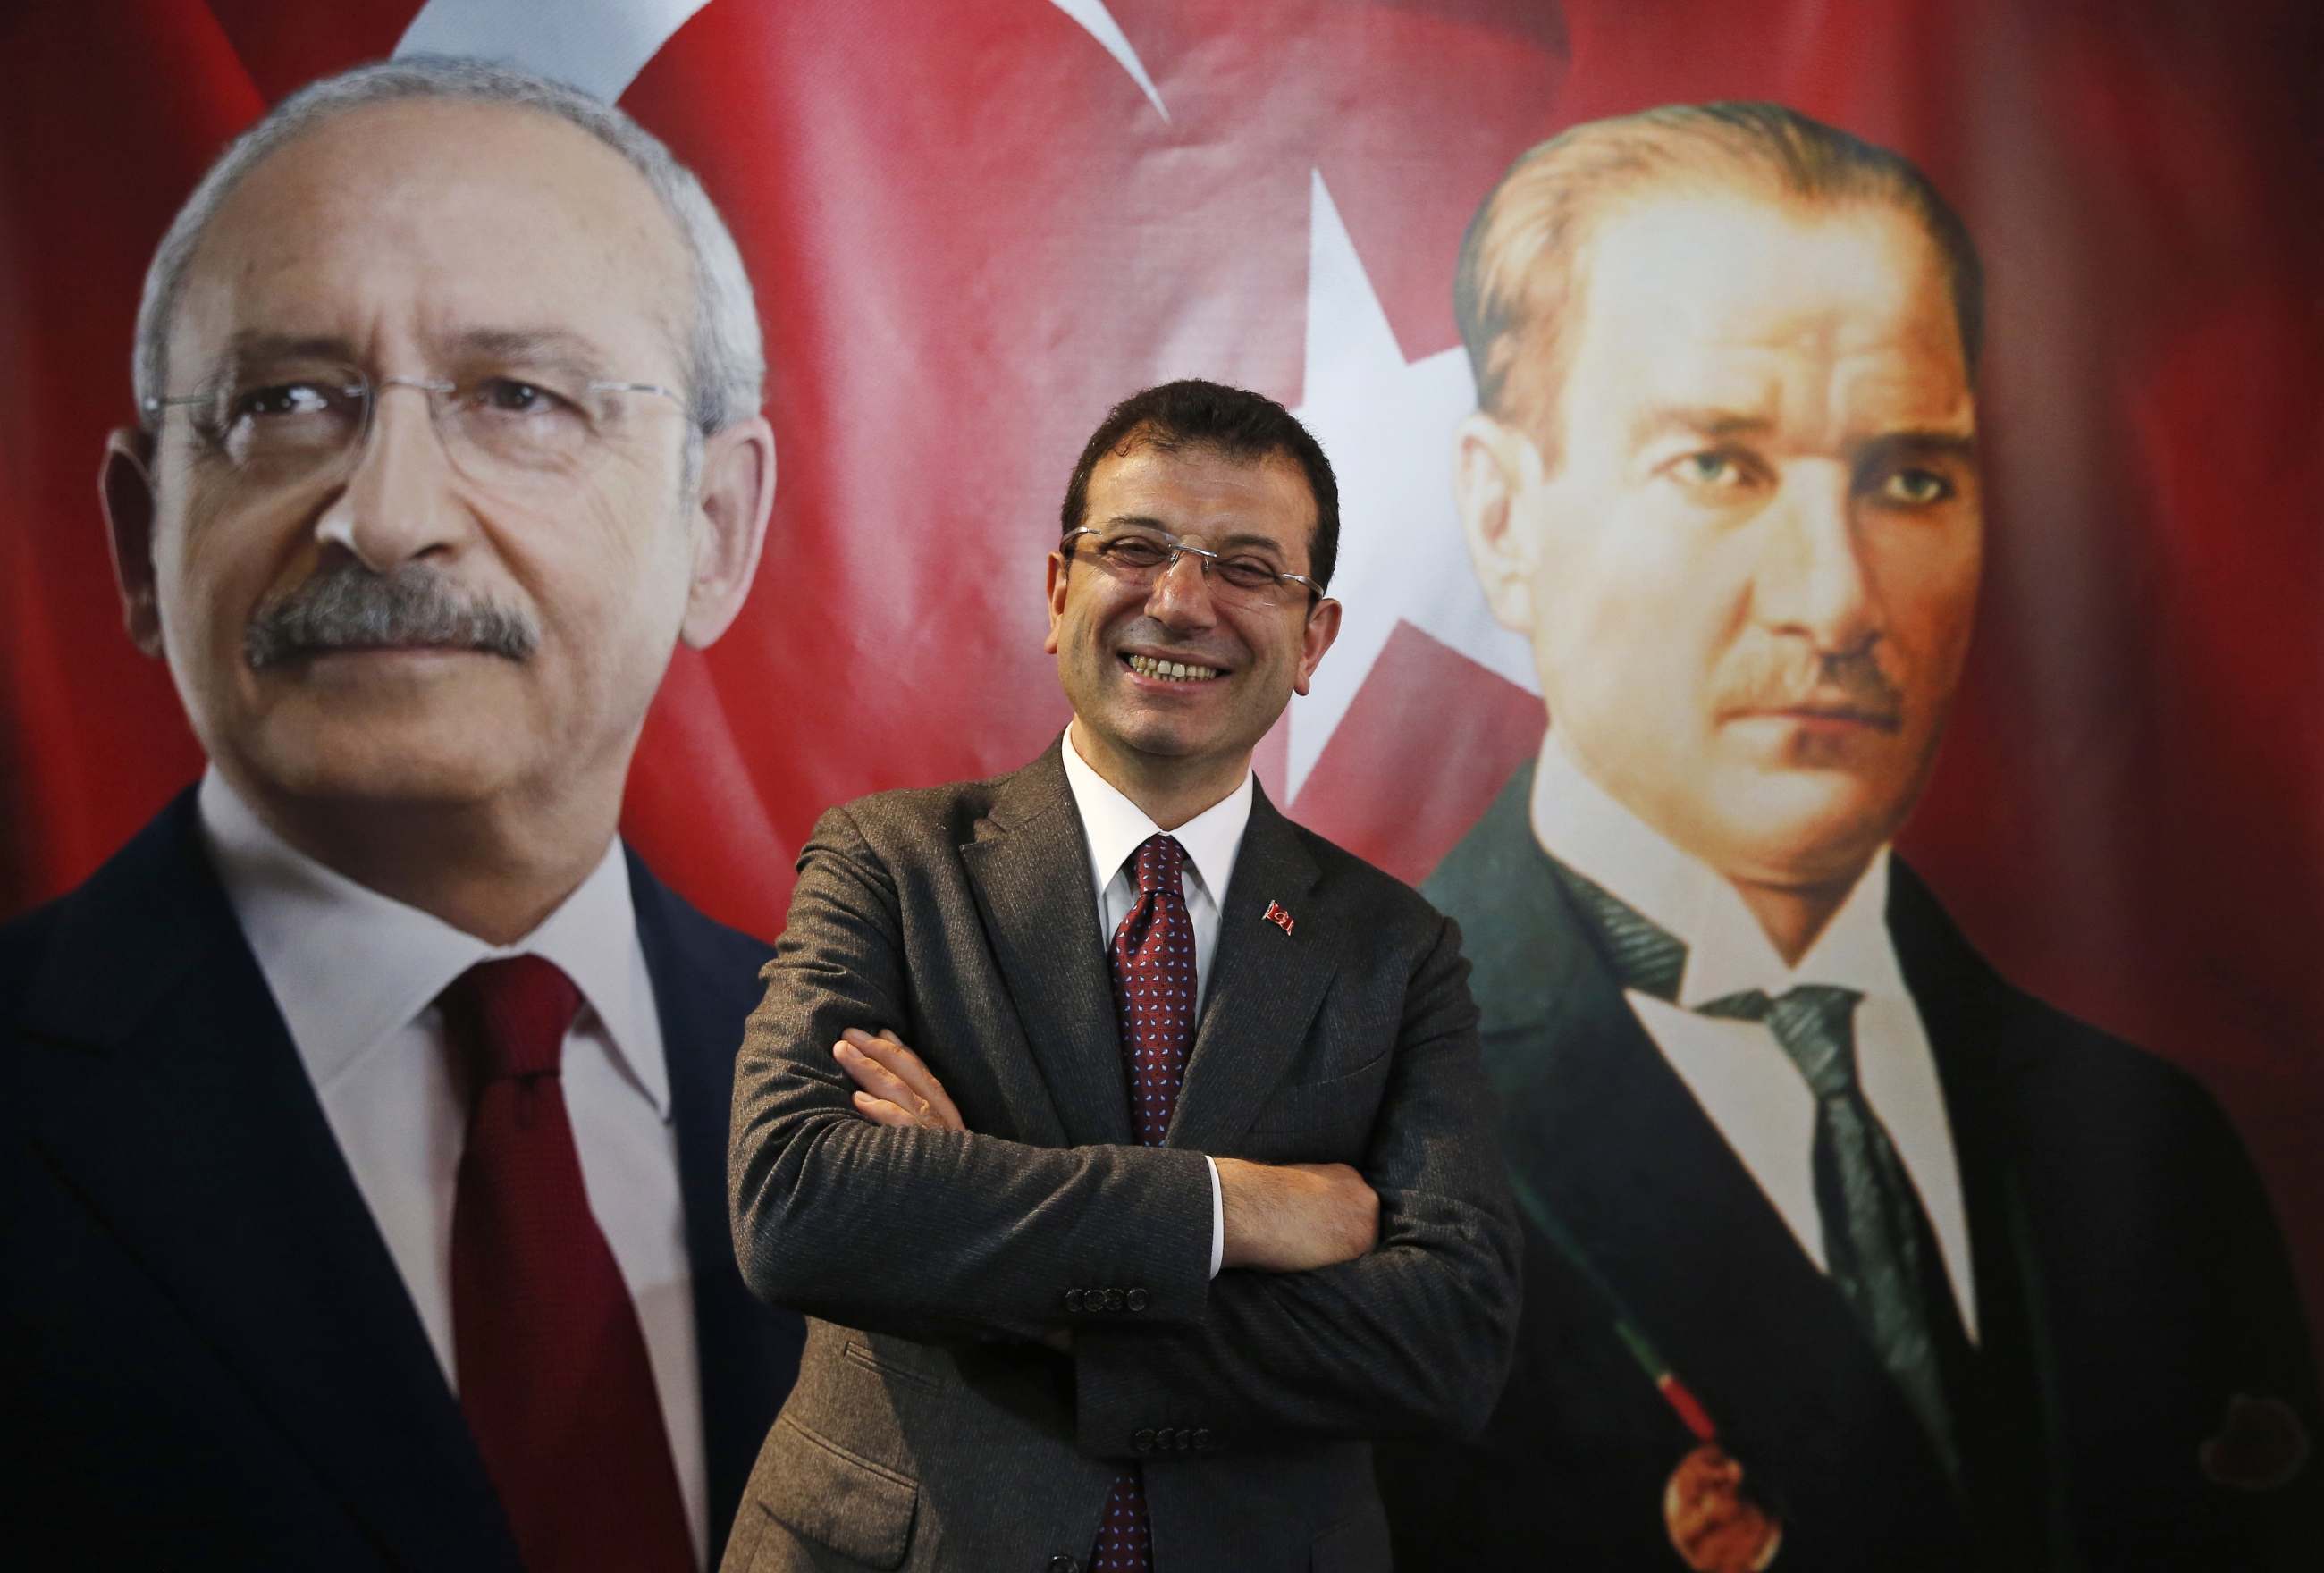 Backdropped by a poster of Kemal Kilicdaroglu, left, and Mustafa Kemal Ataturk, right, Ekrem Imamoglu poses for a photo in 2019 (AP)